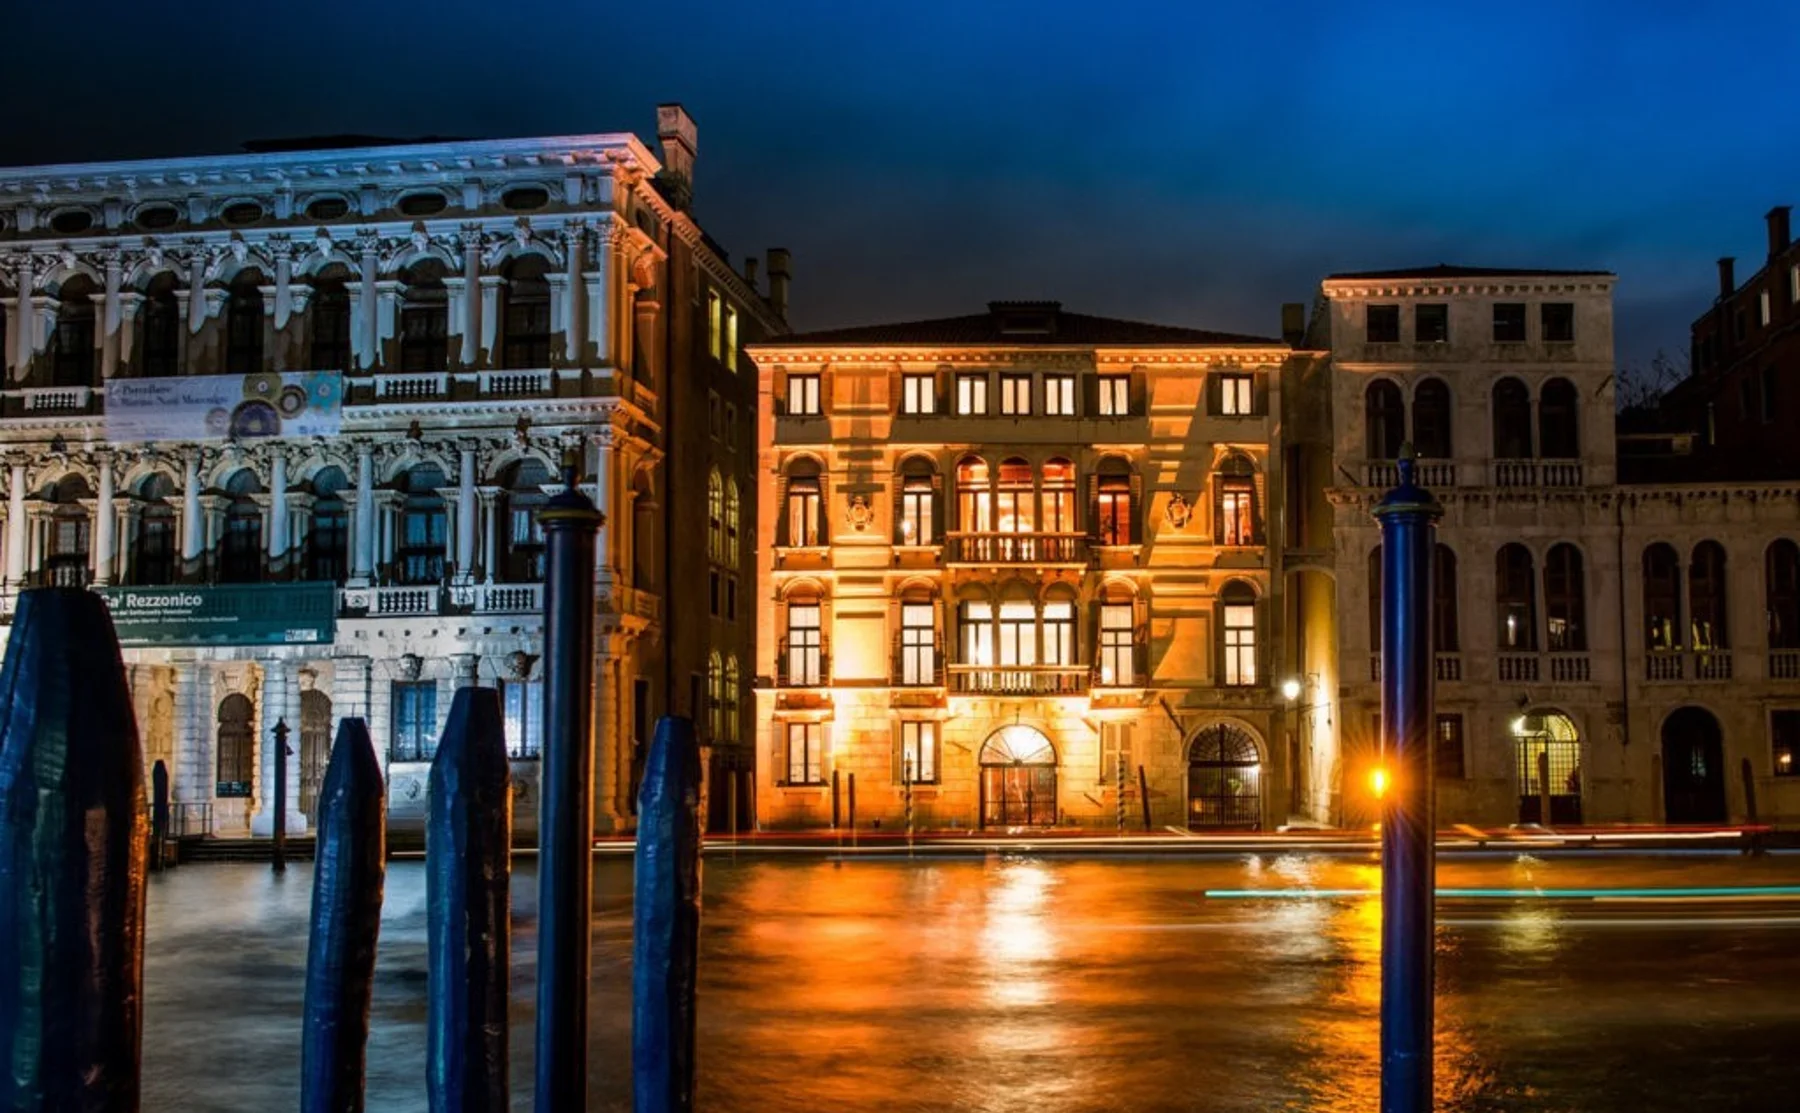 Aperitif with guided tour of historical Venetian palace on the Grand Canal  - 1319423